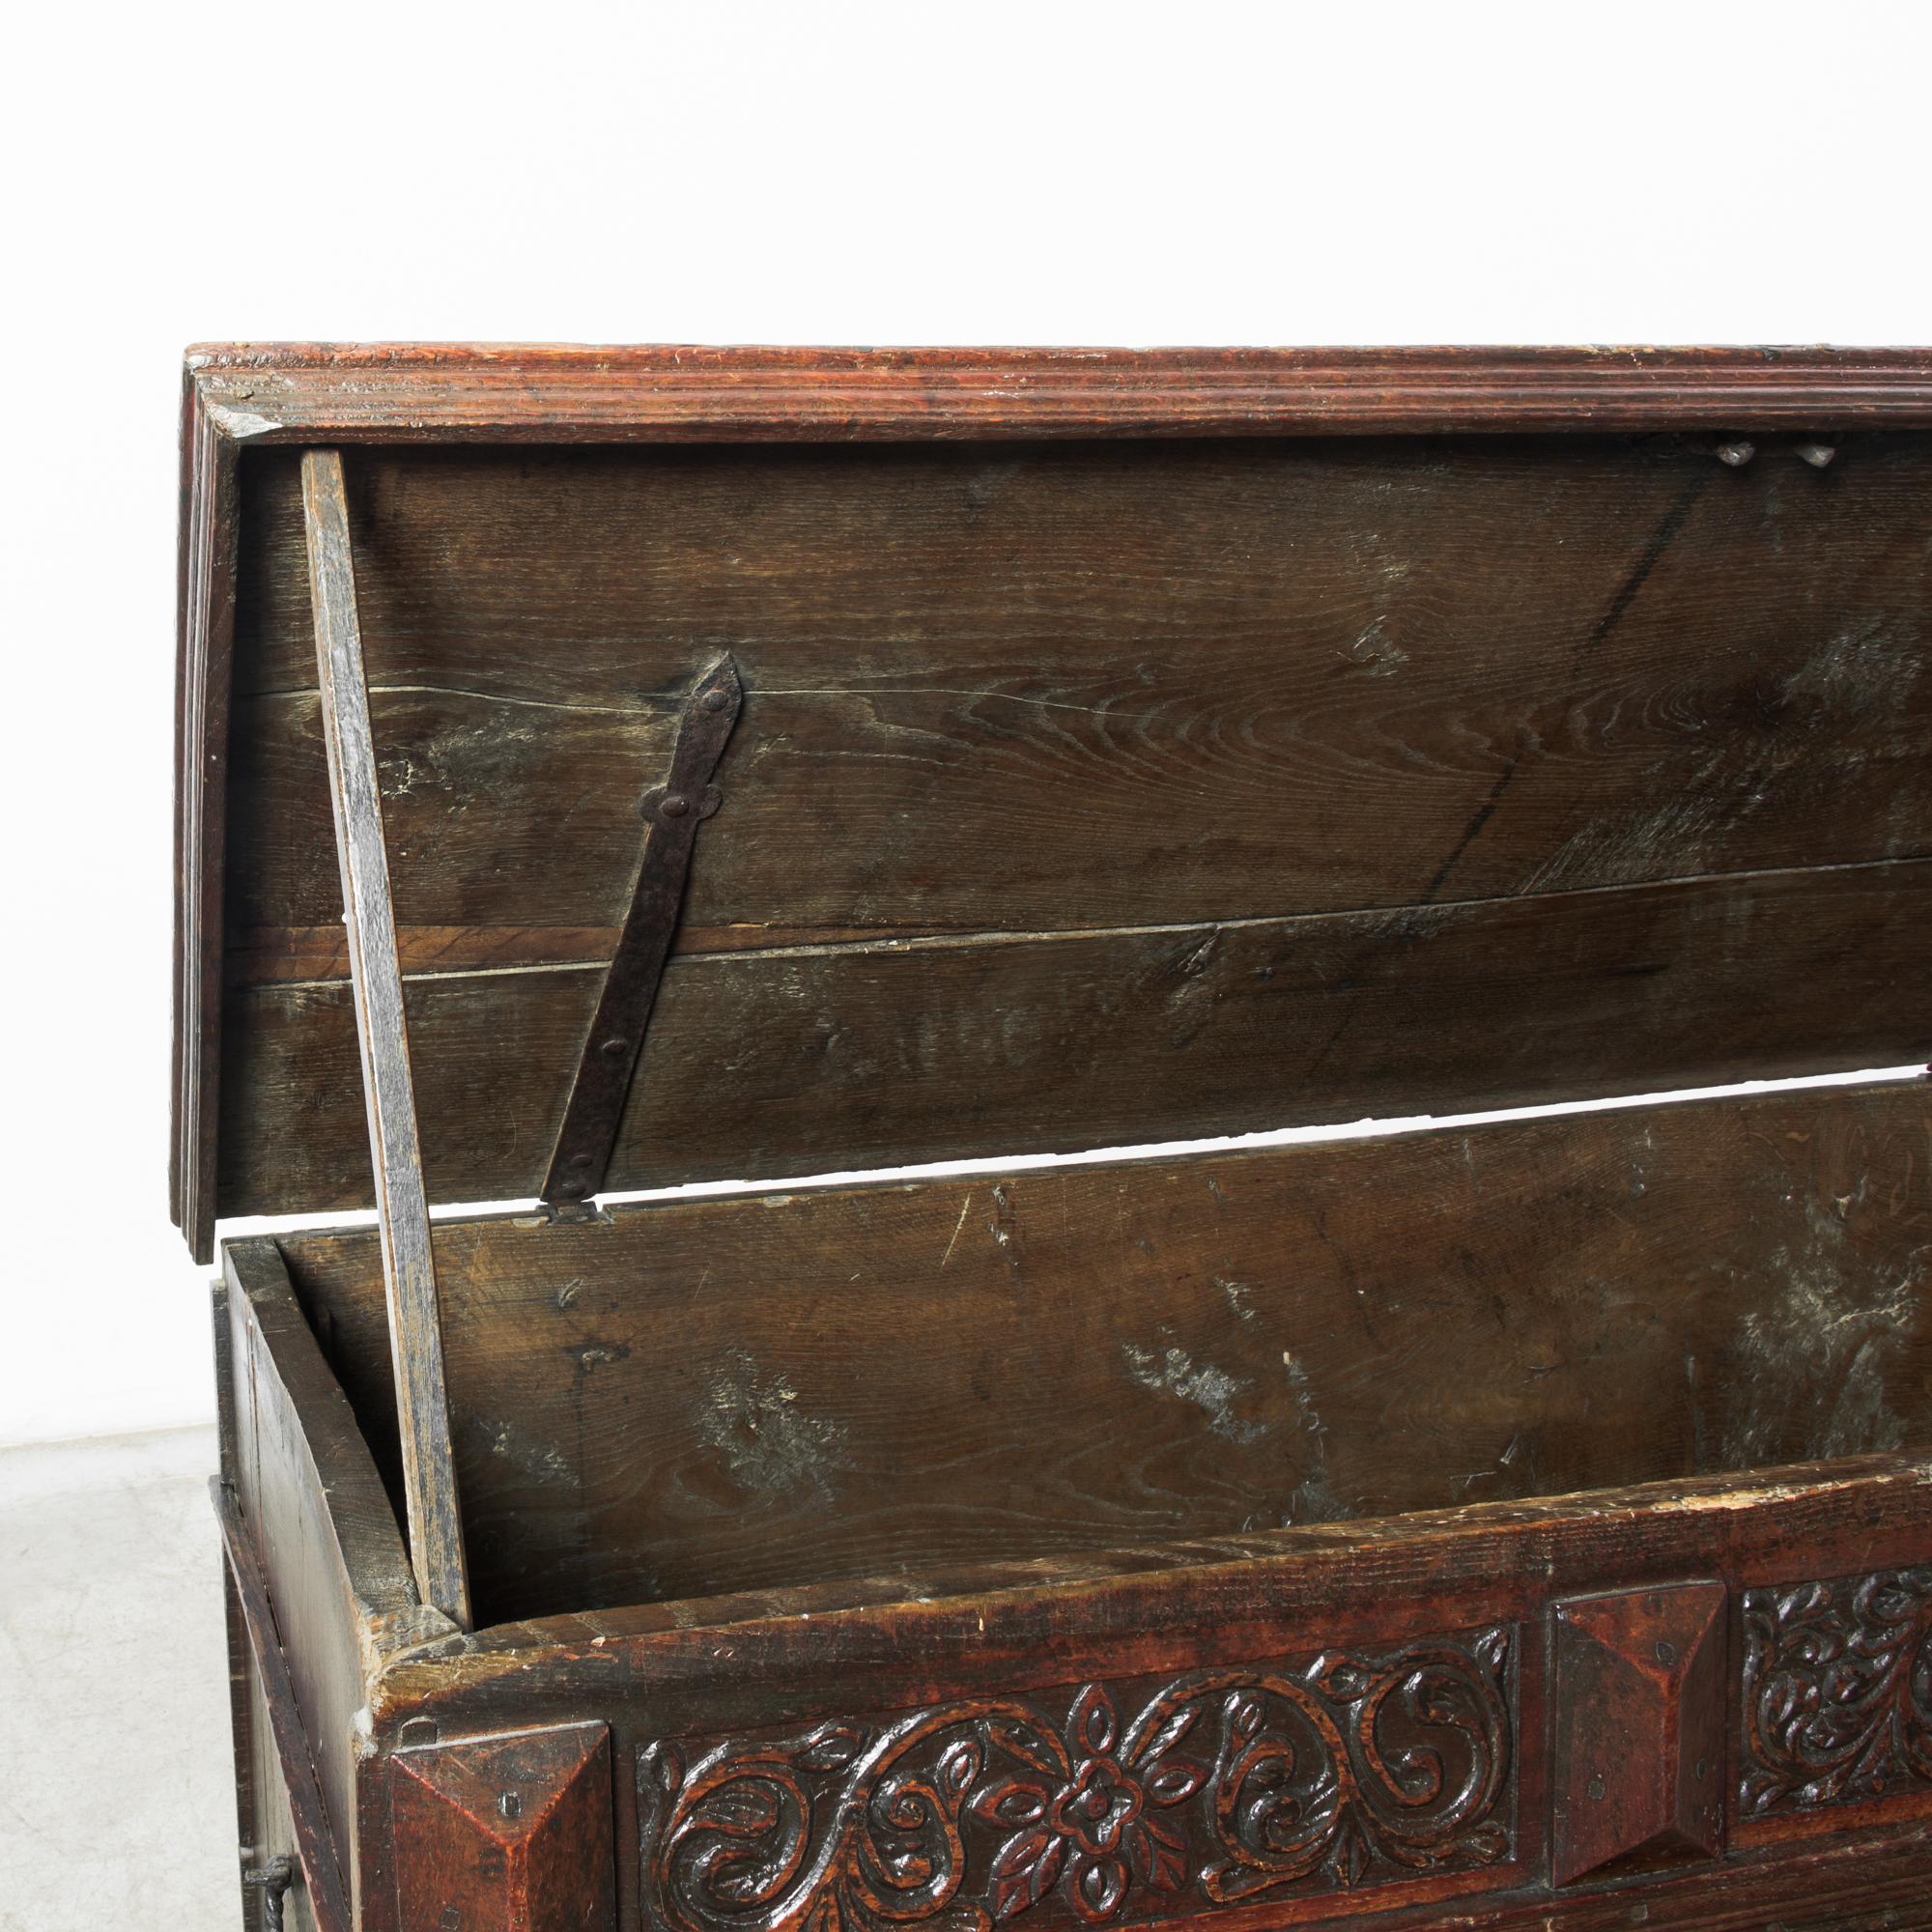 18th Century 1720s German Wooden Trunk with Original Patina